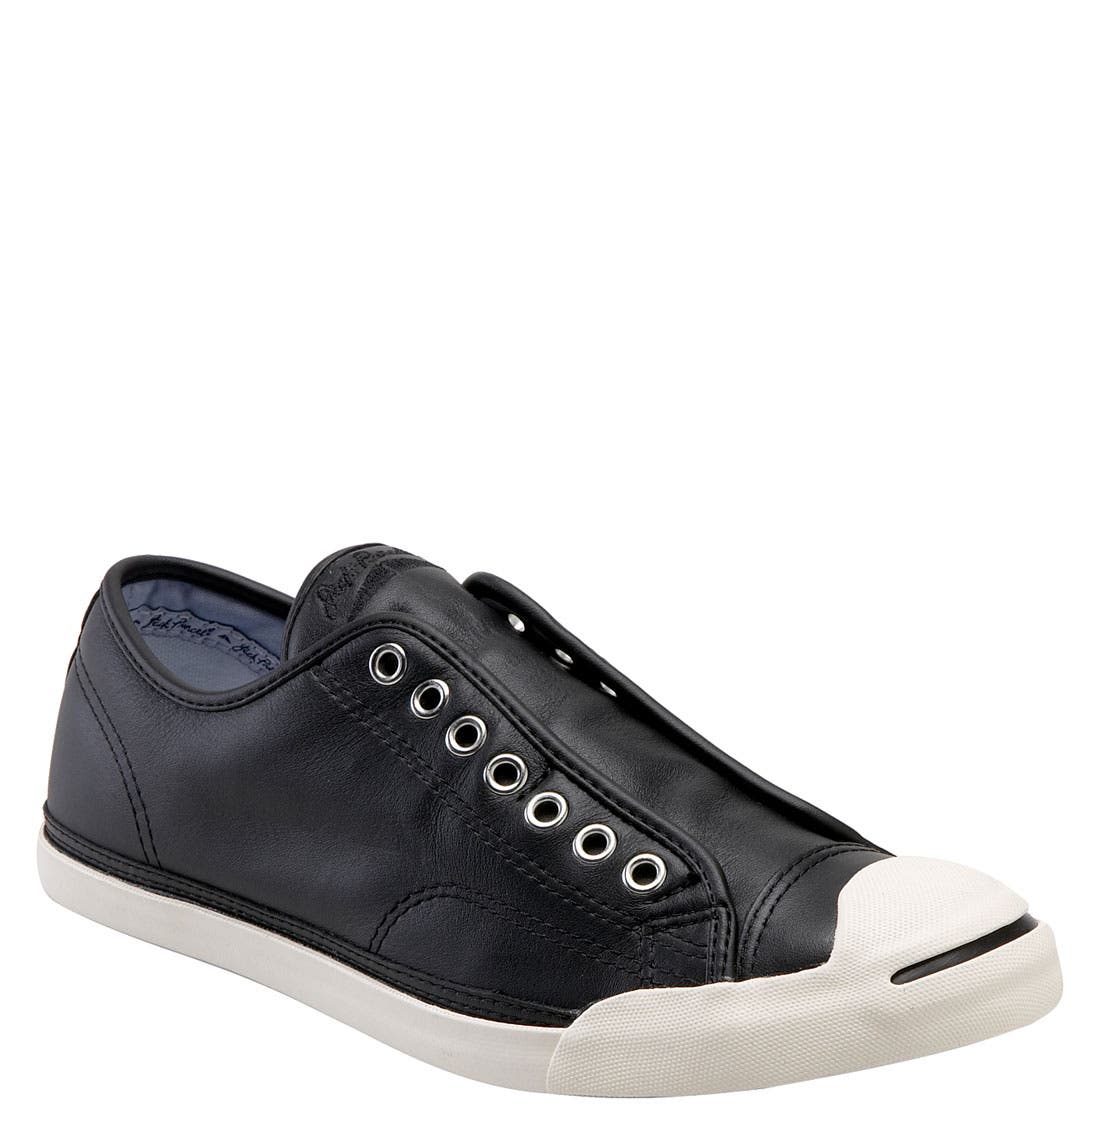 converse jack purcell lp